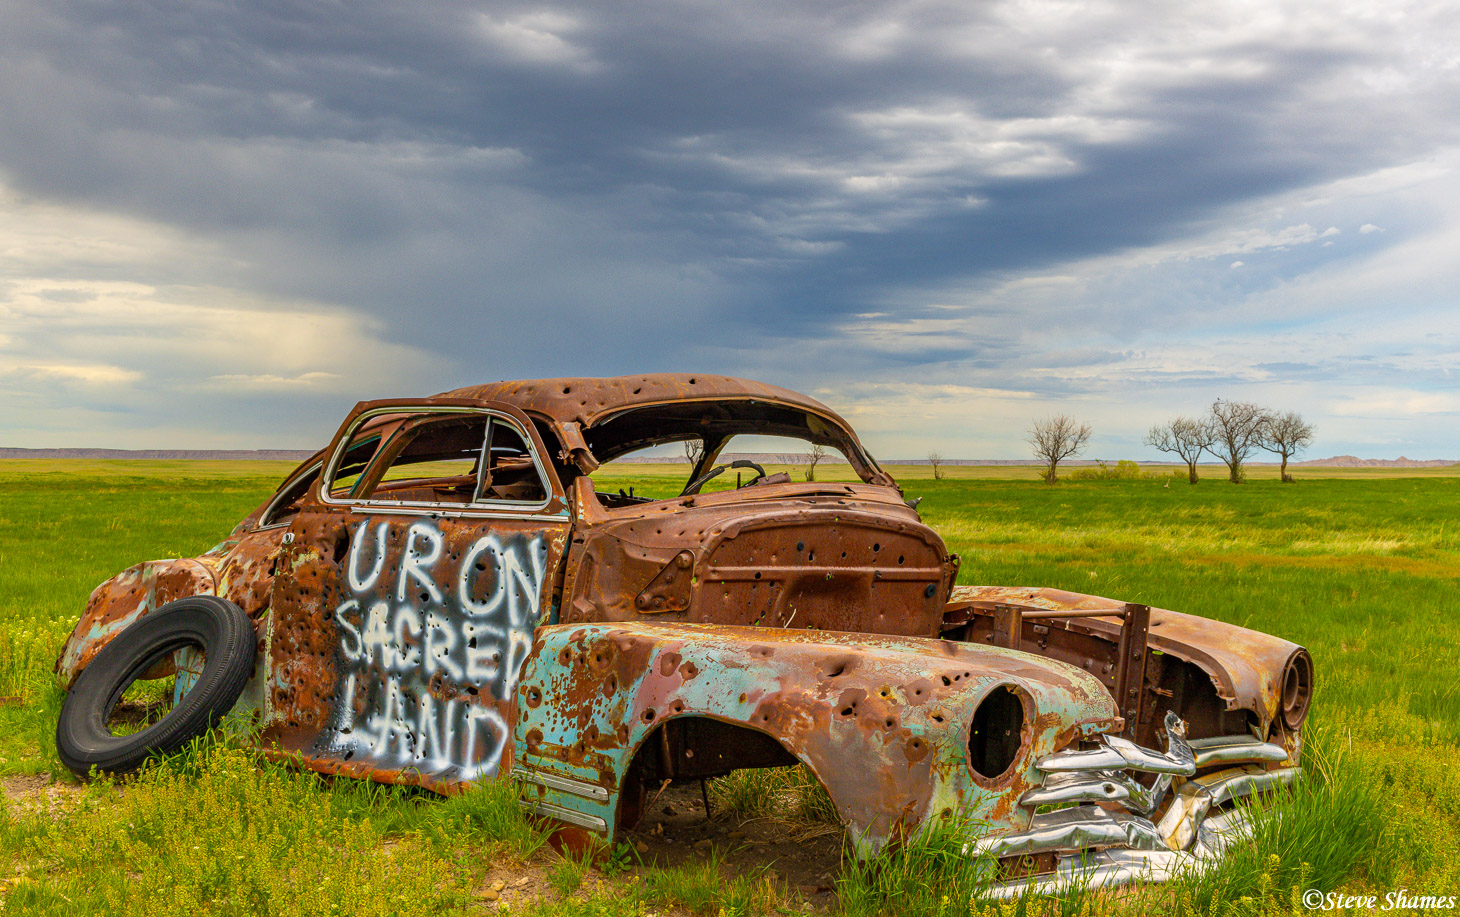 This bullet riddled junked car says "Ur on sacred land". I am assuming somebody wrote that so this car might be removed. This...